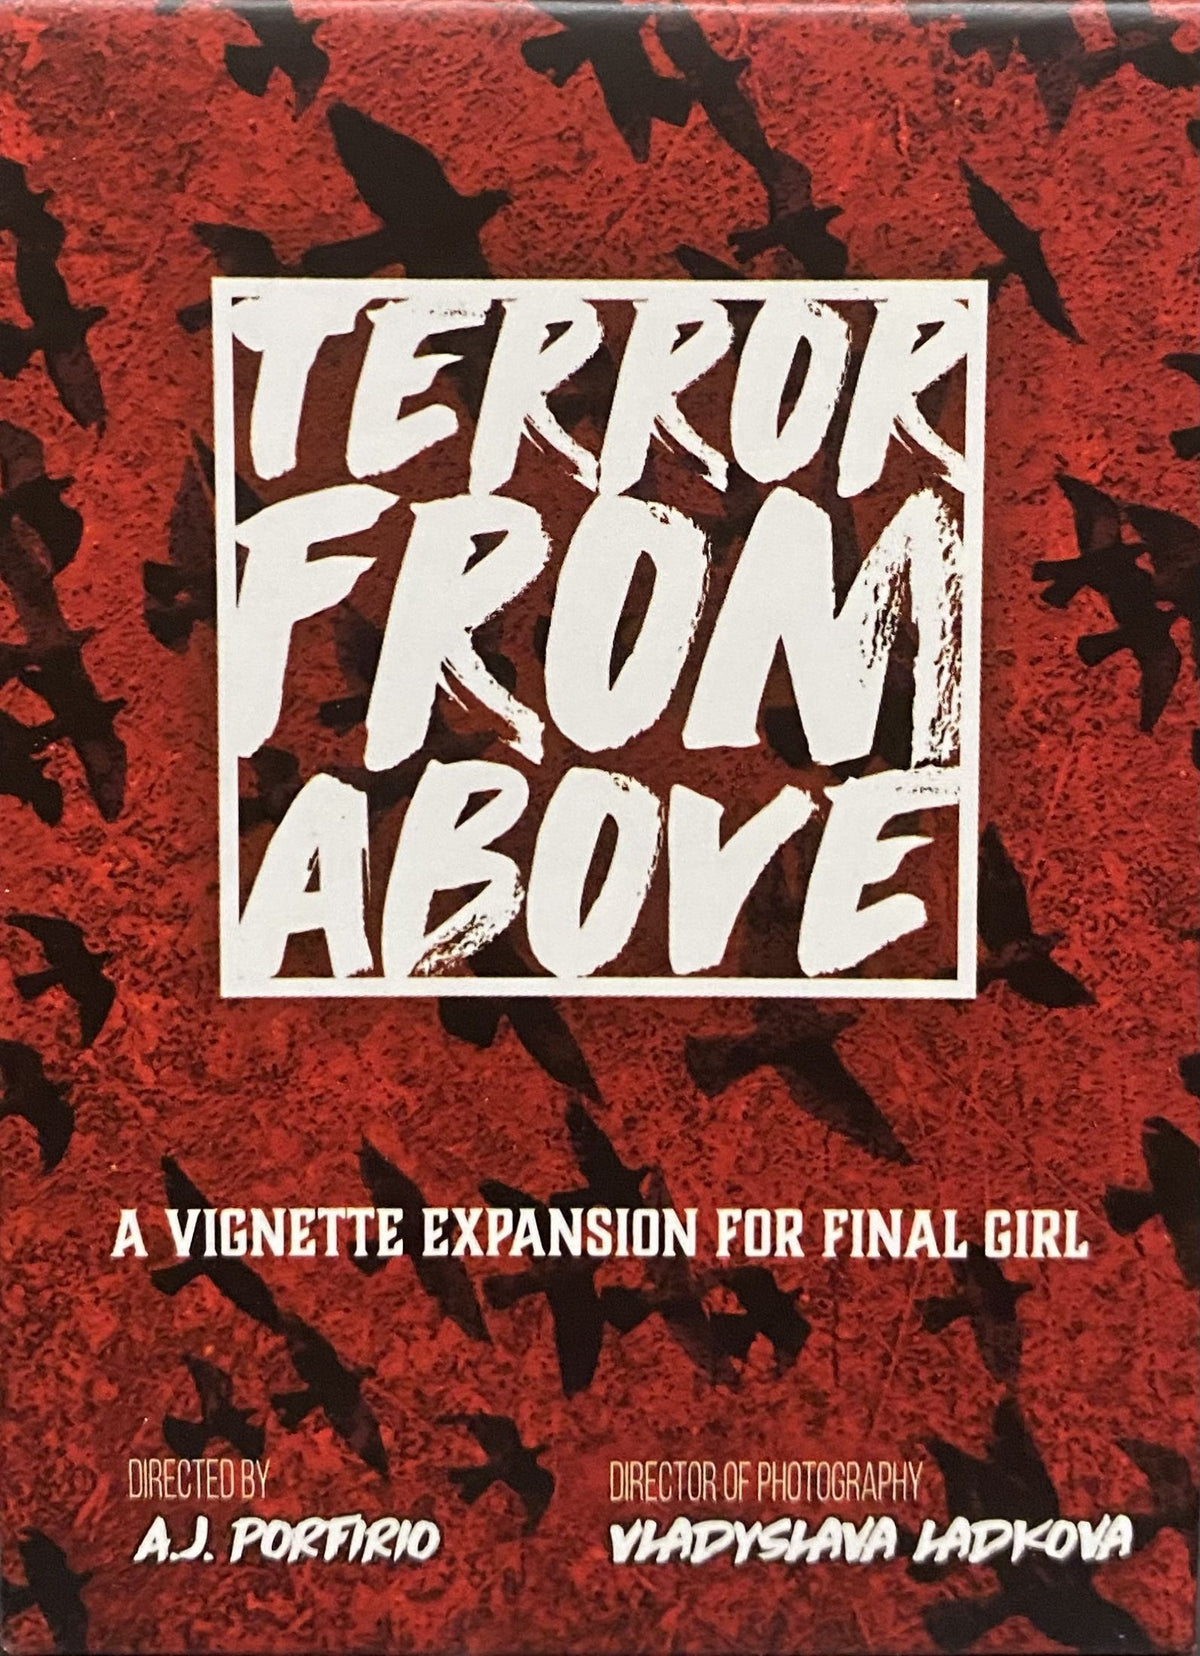 Final Girl Terror from Above Vignette Expansion